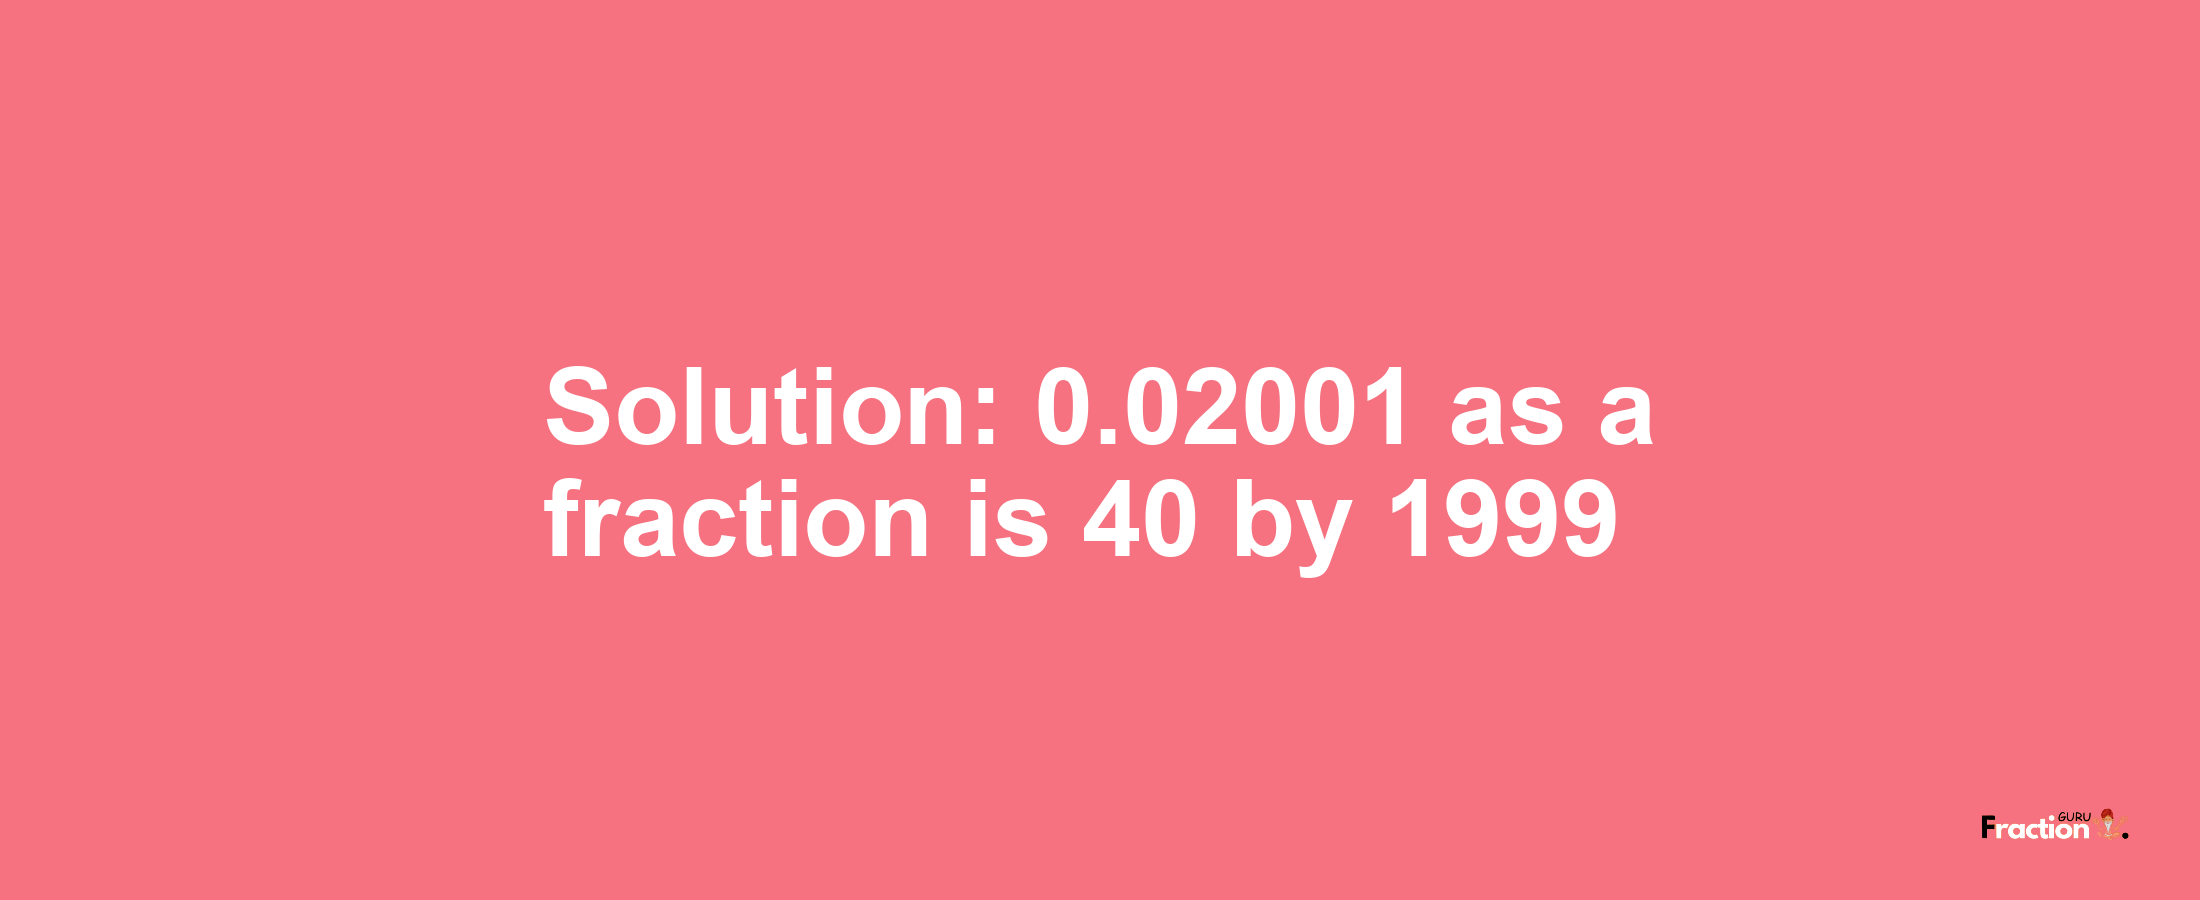 Solution:0.02001 as a fraction is 40/1999